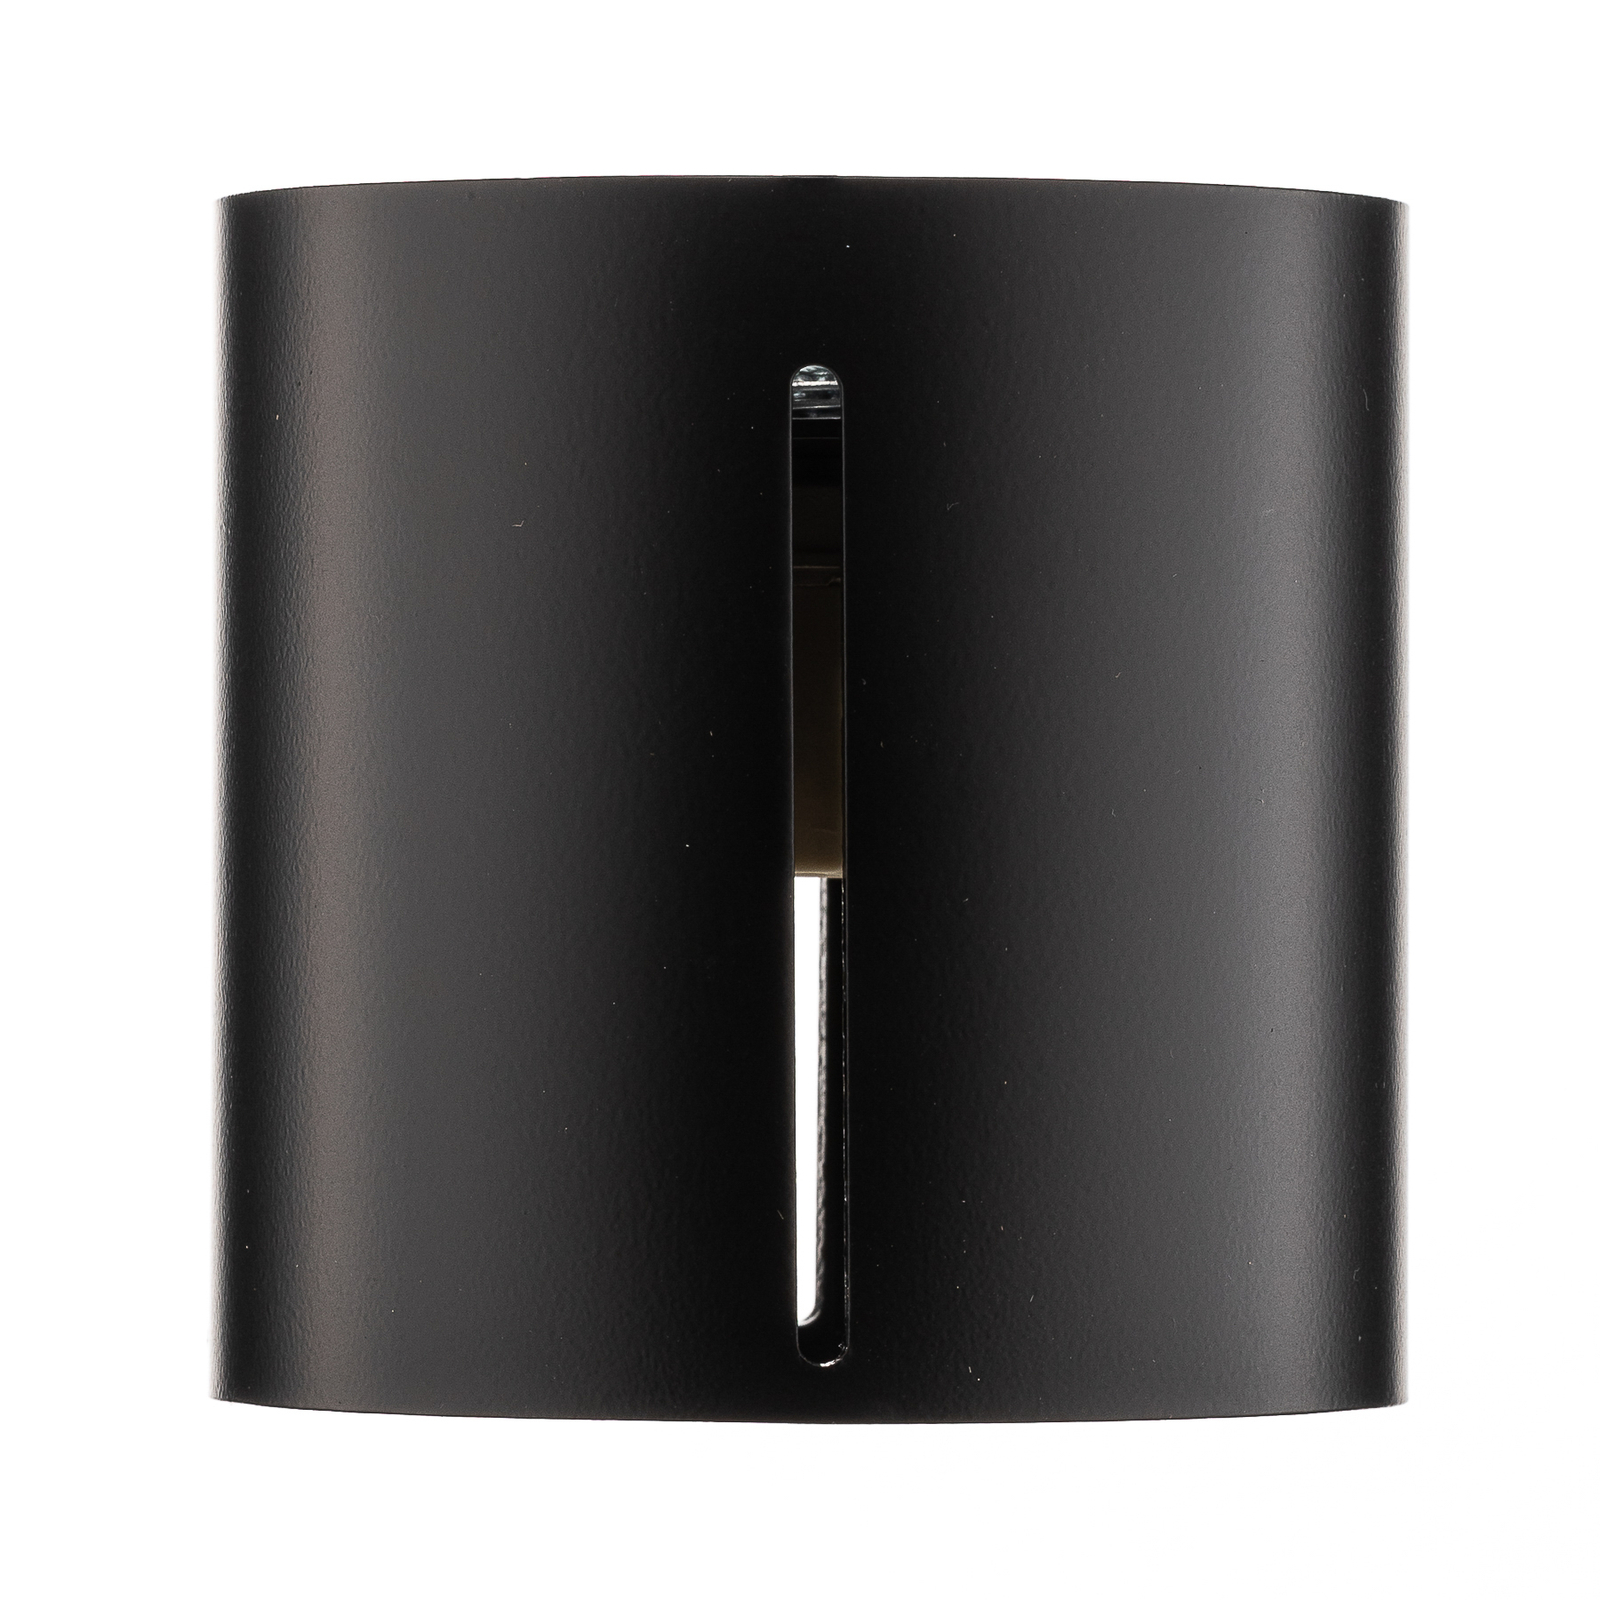 Topa ceiling light as a black cylinder